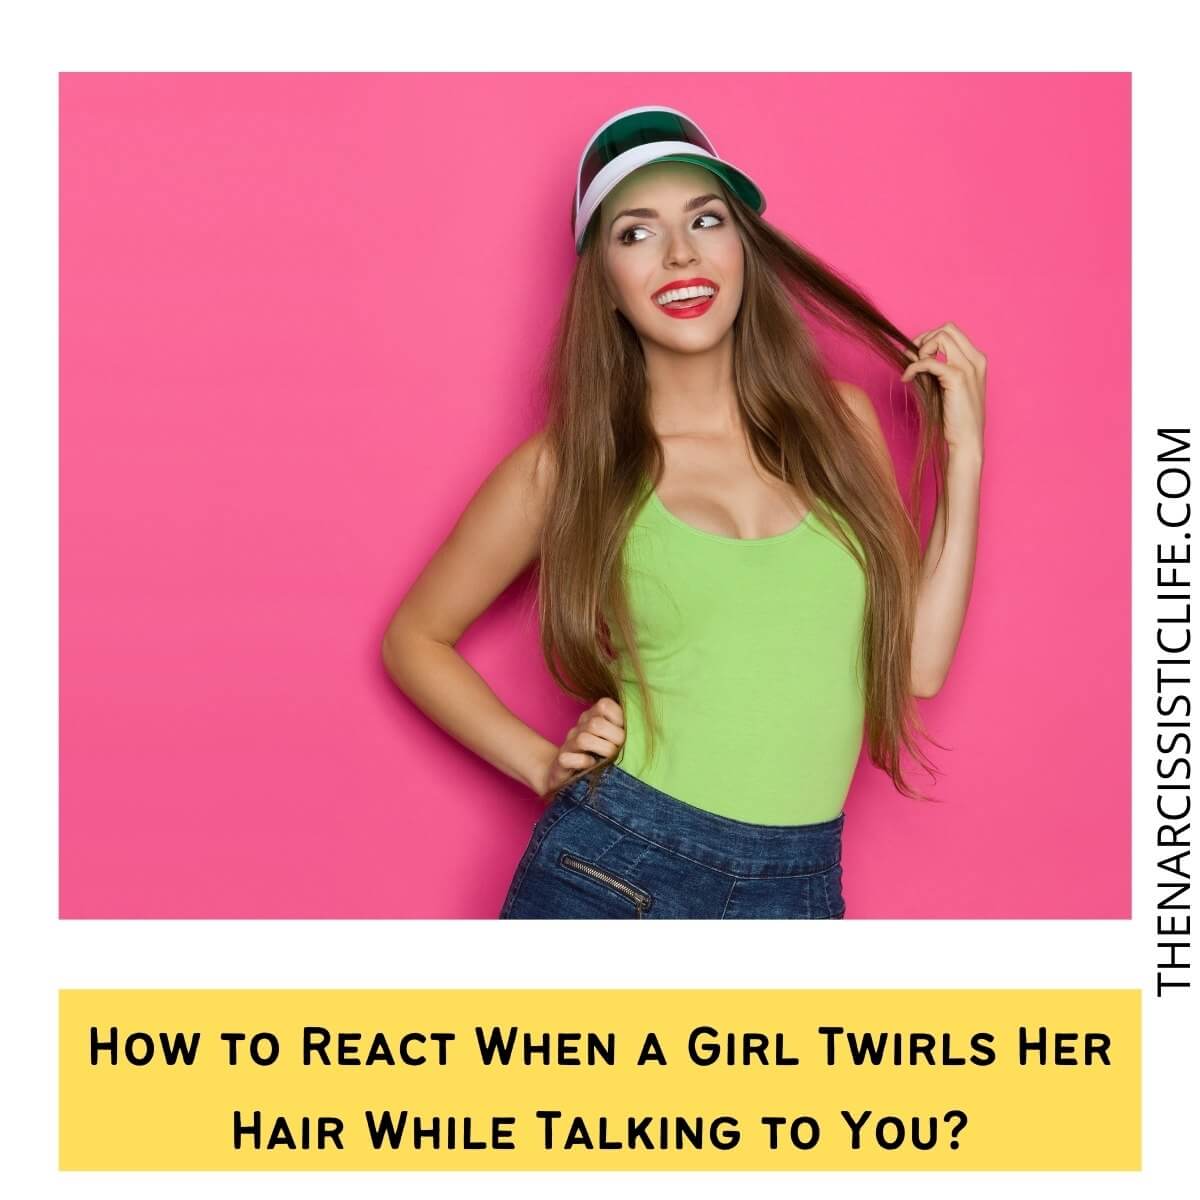 What Does it Mean When Girls Play With Their Hair? - The Narcissistic Life